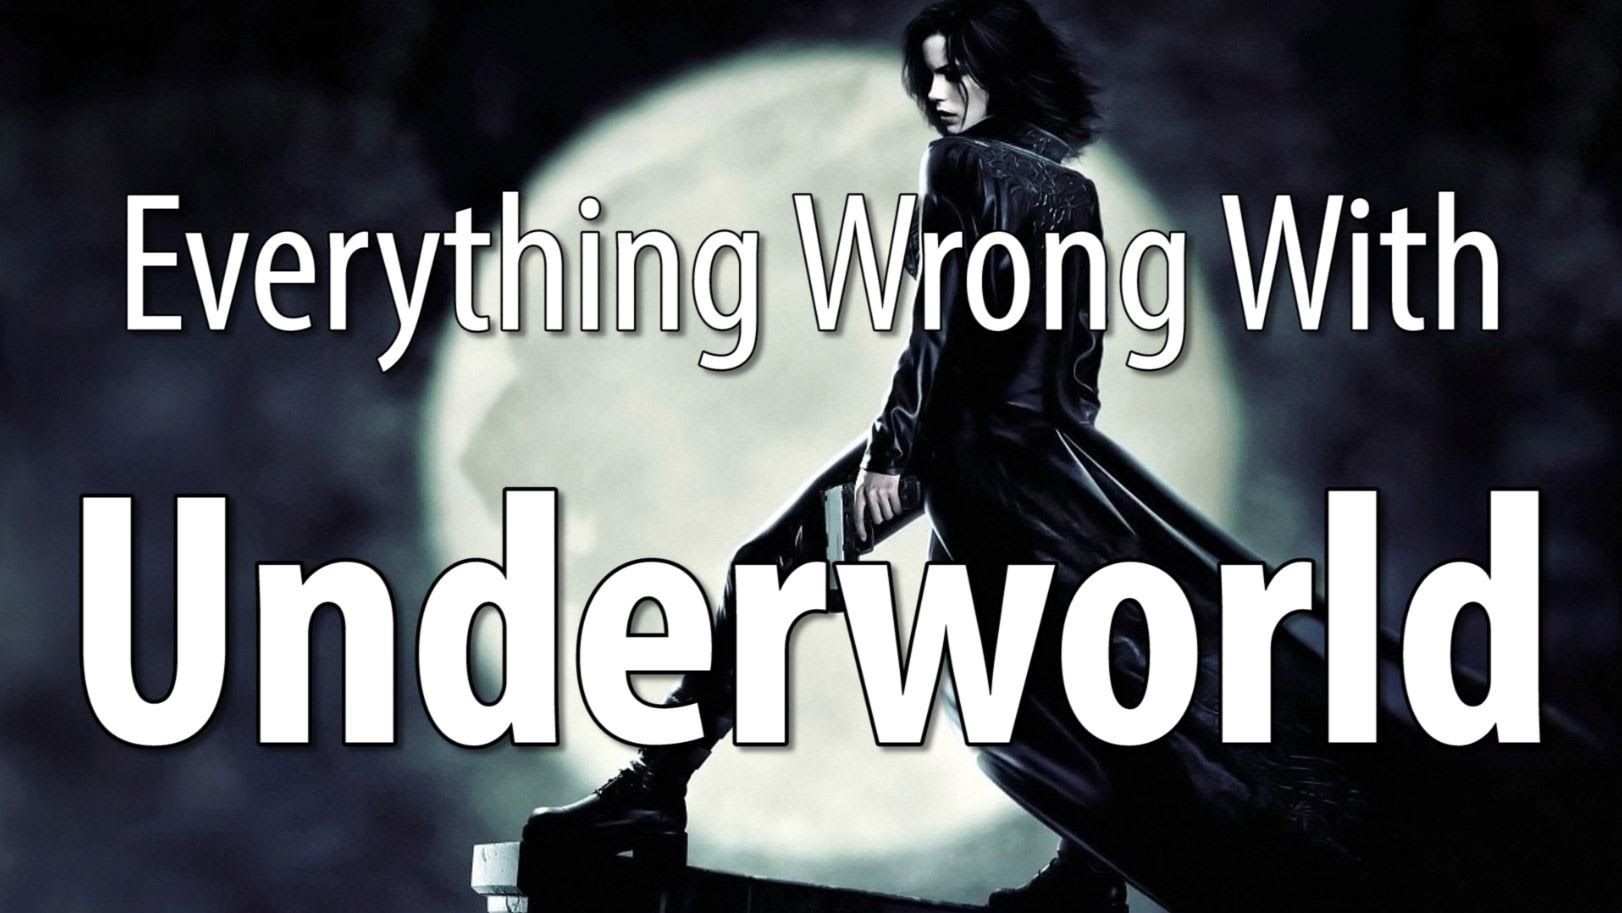 Everything wrong with. Everything's wrong. Siu everything wrong. Siu guessed everything wrong. Everything is wrong